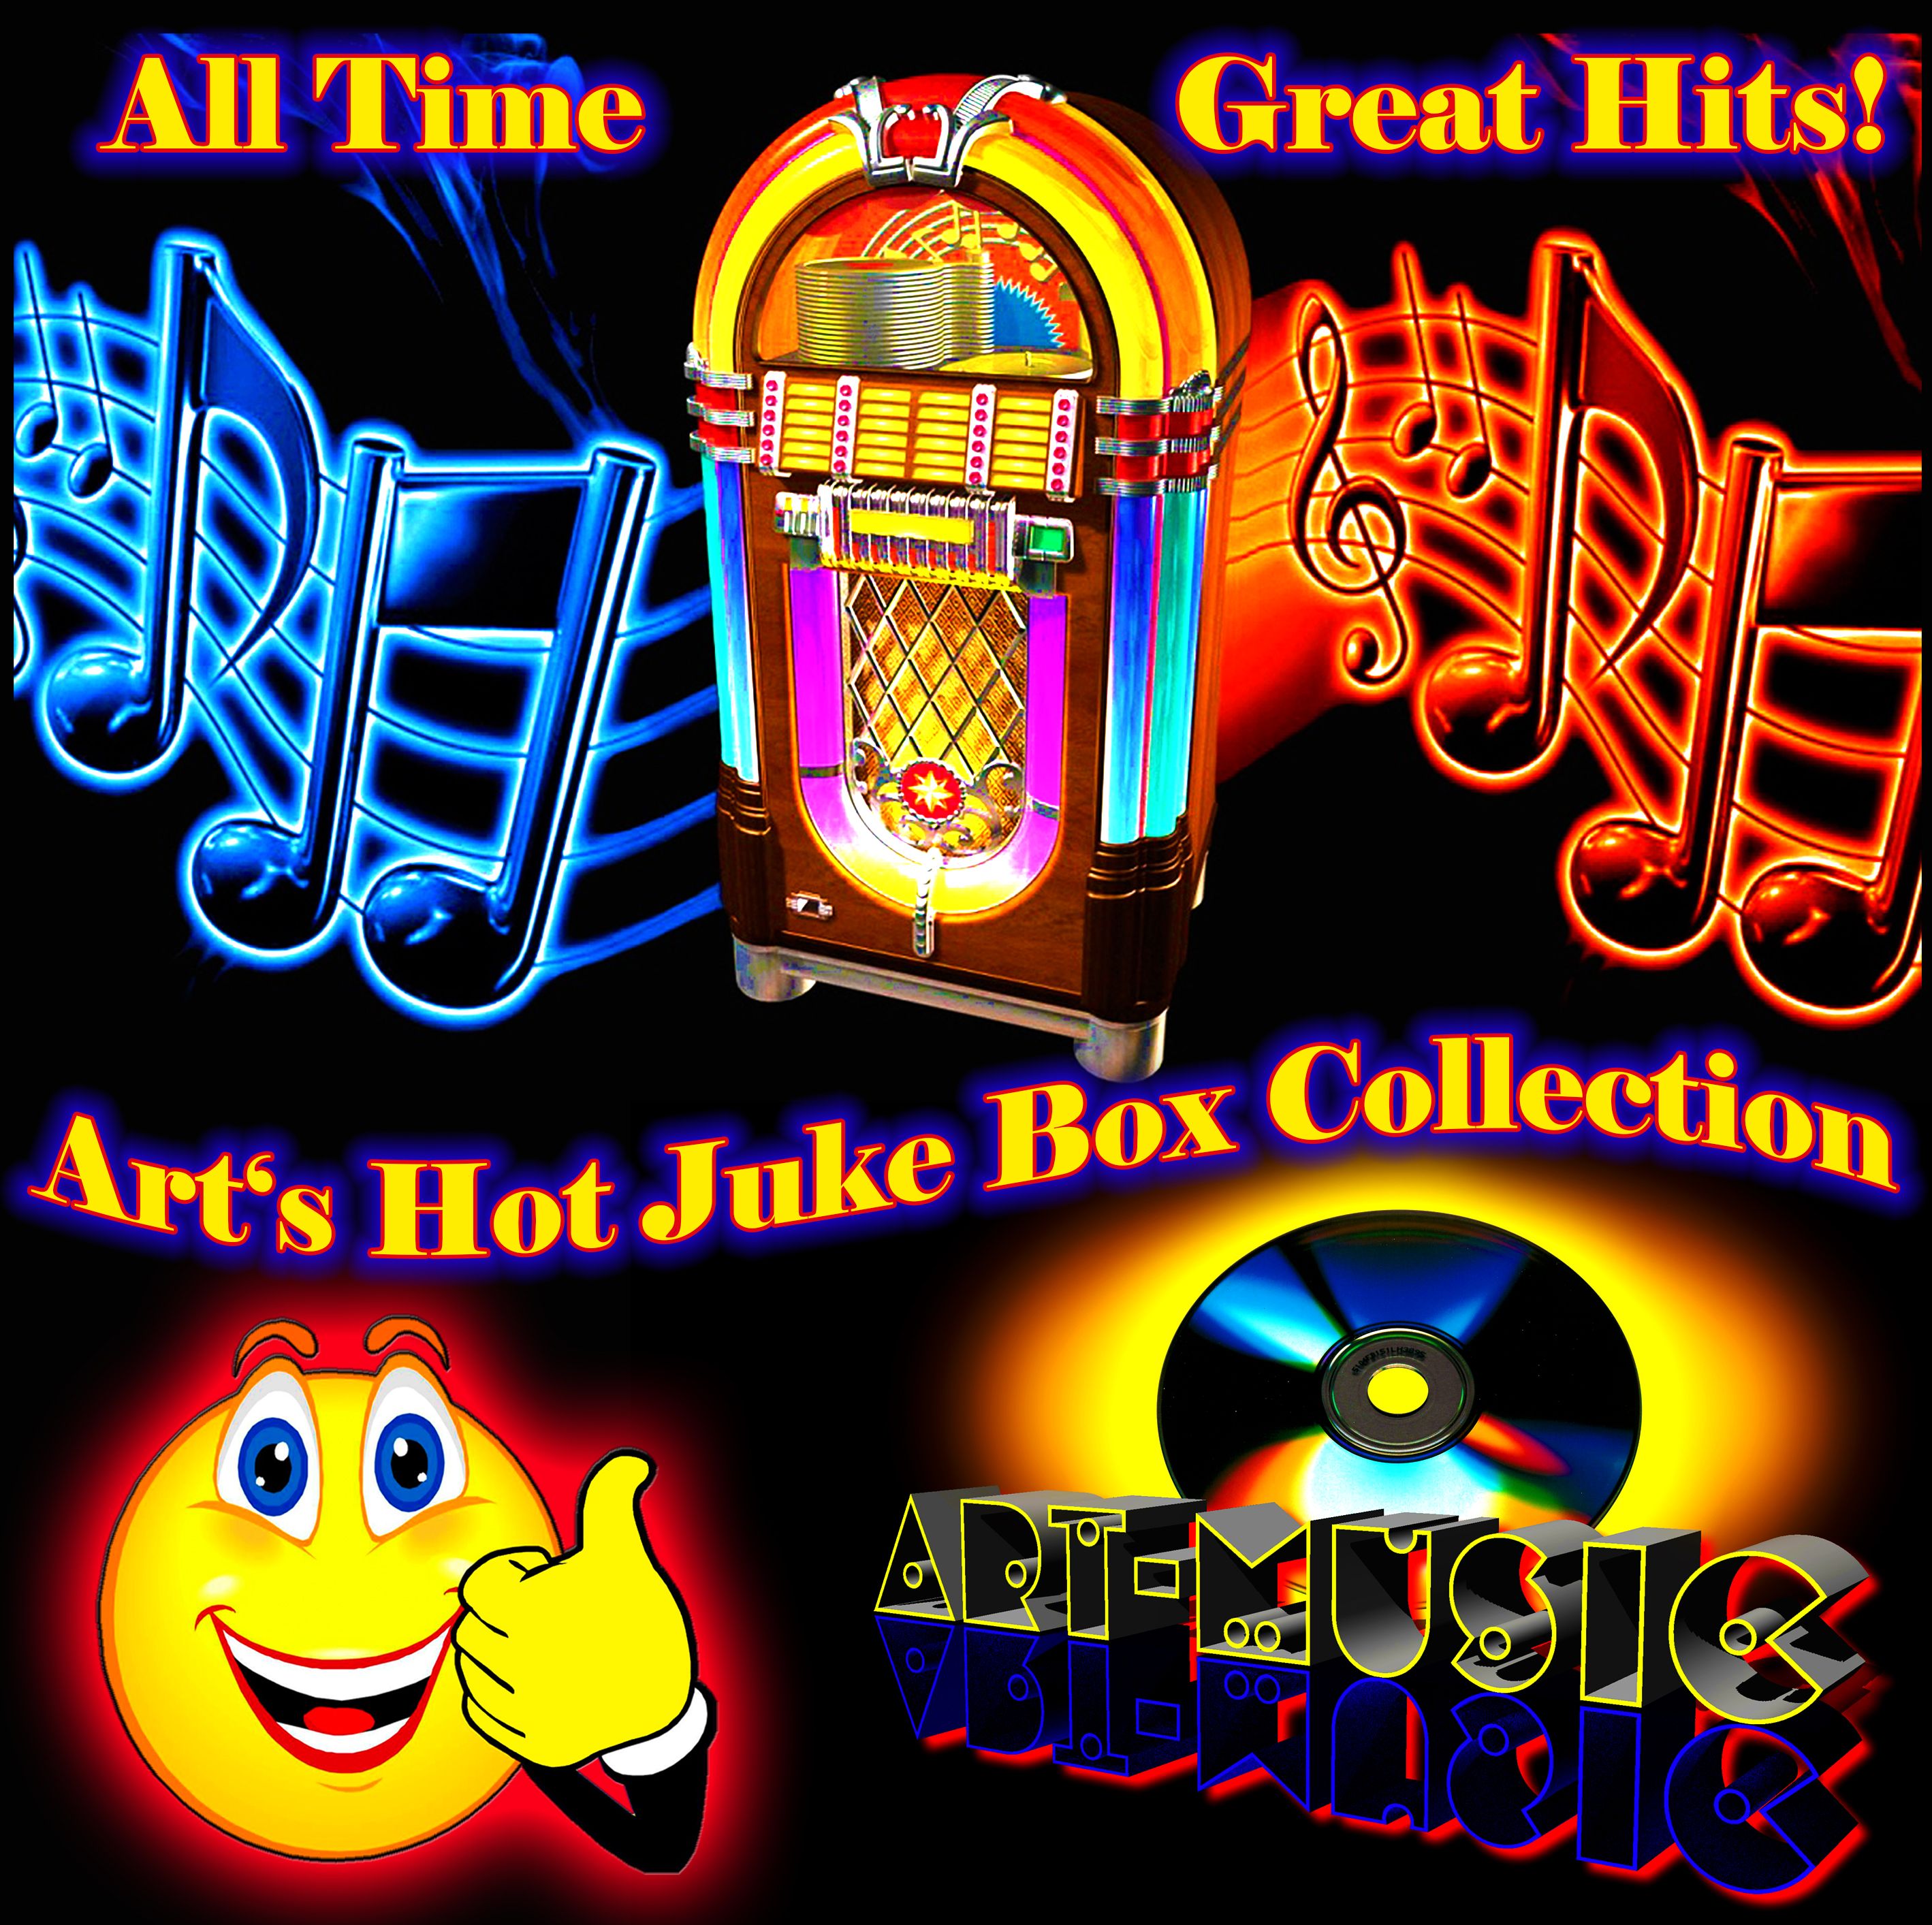 Art's Hot Juke Box Collection - All Time Great Hits! by Art&Music 50cd